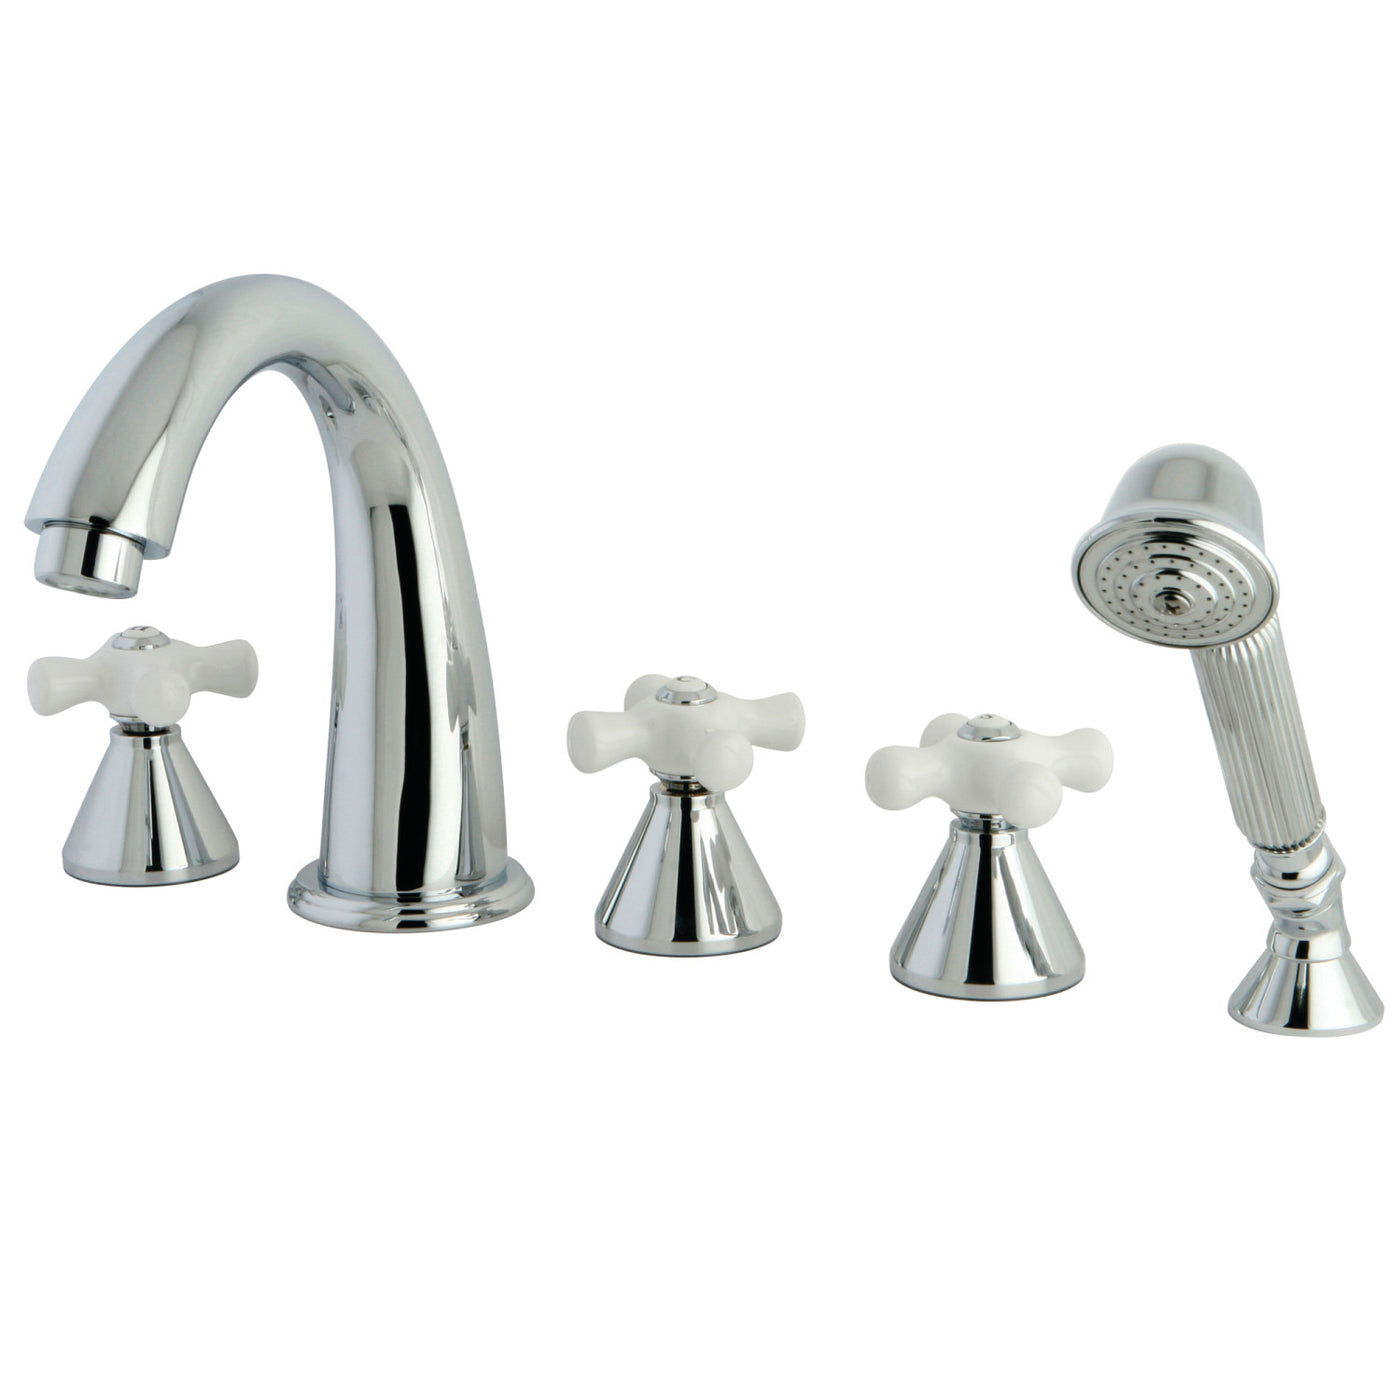 Elements of Design ES23615PX 5-Piece Roman Tub Faucet with Hand Shower, Polished Chrome